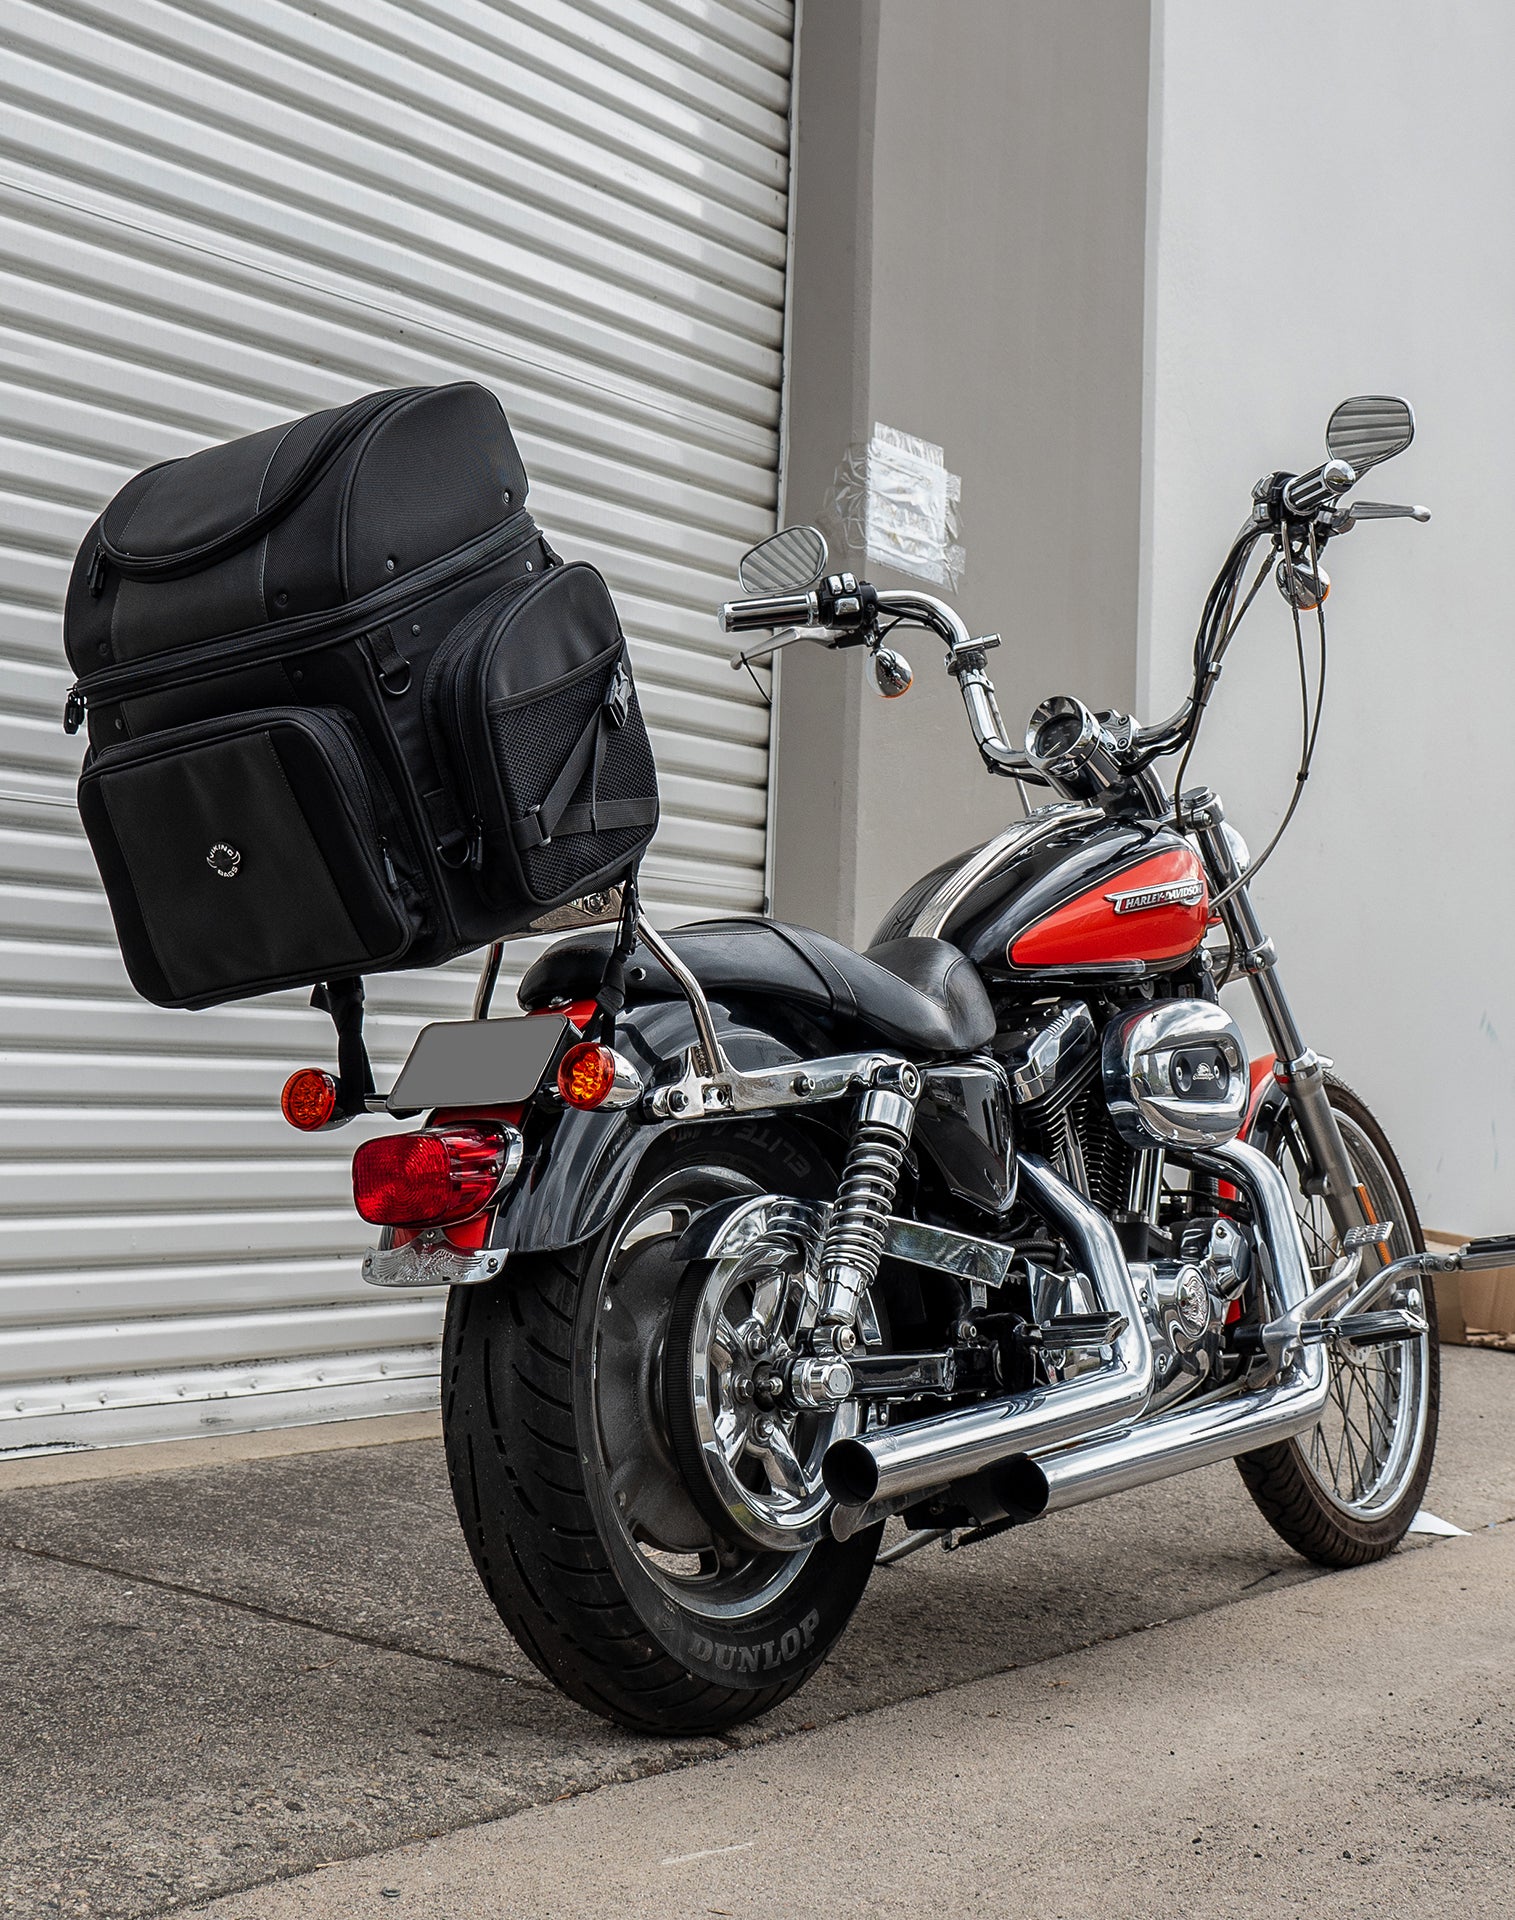 52L - Galleon XL Motorcycle Tail Bag for Harley Davidson